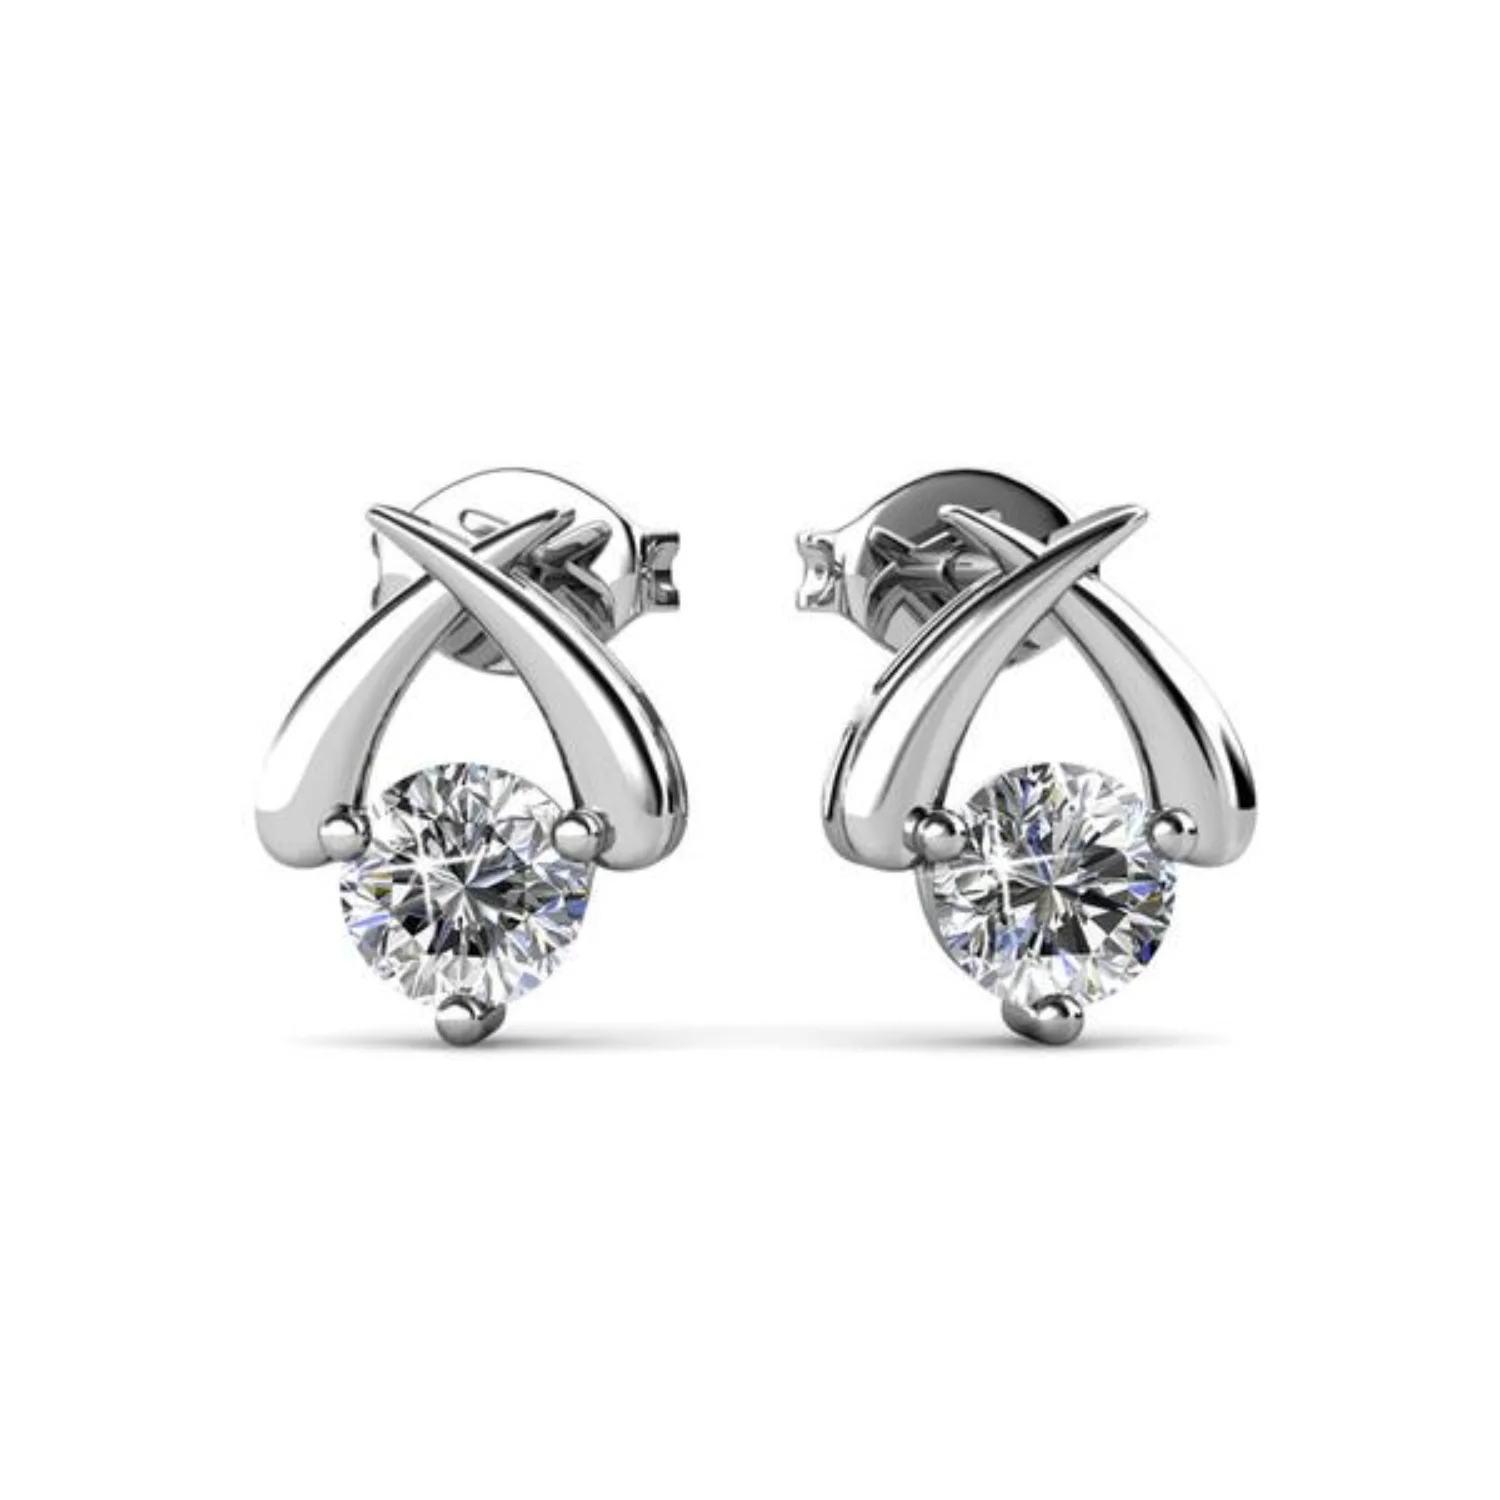 

Eloise Modest Unique White Gold Stud Halo Earrings, 18k White Gold Plated Studs with Crystals, Geometric Stud Earring Set Solita